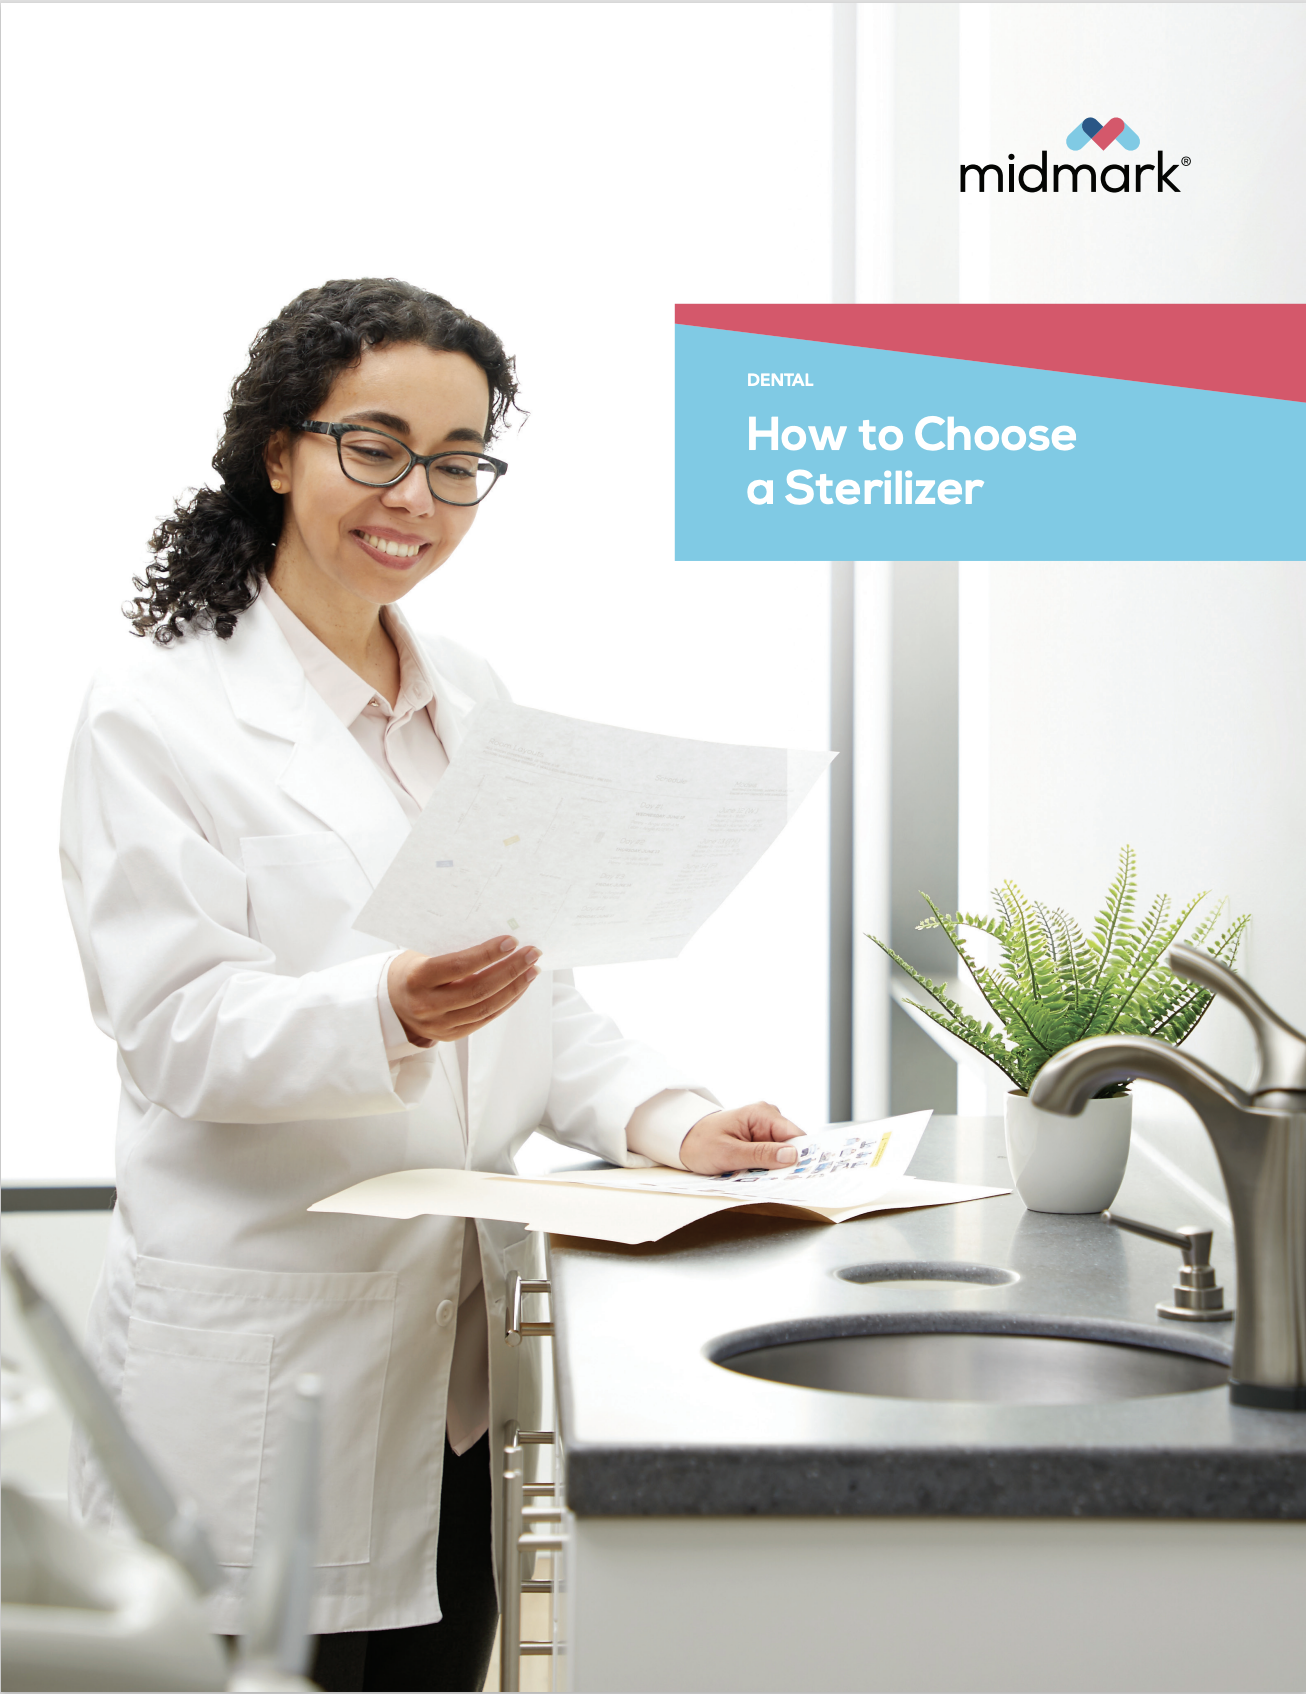 How to Choose a Sterilizer